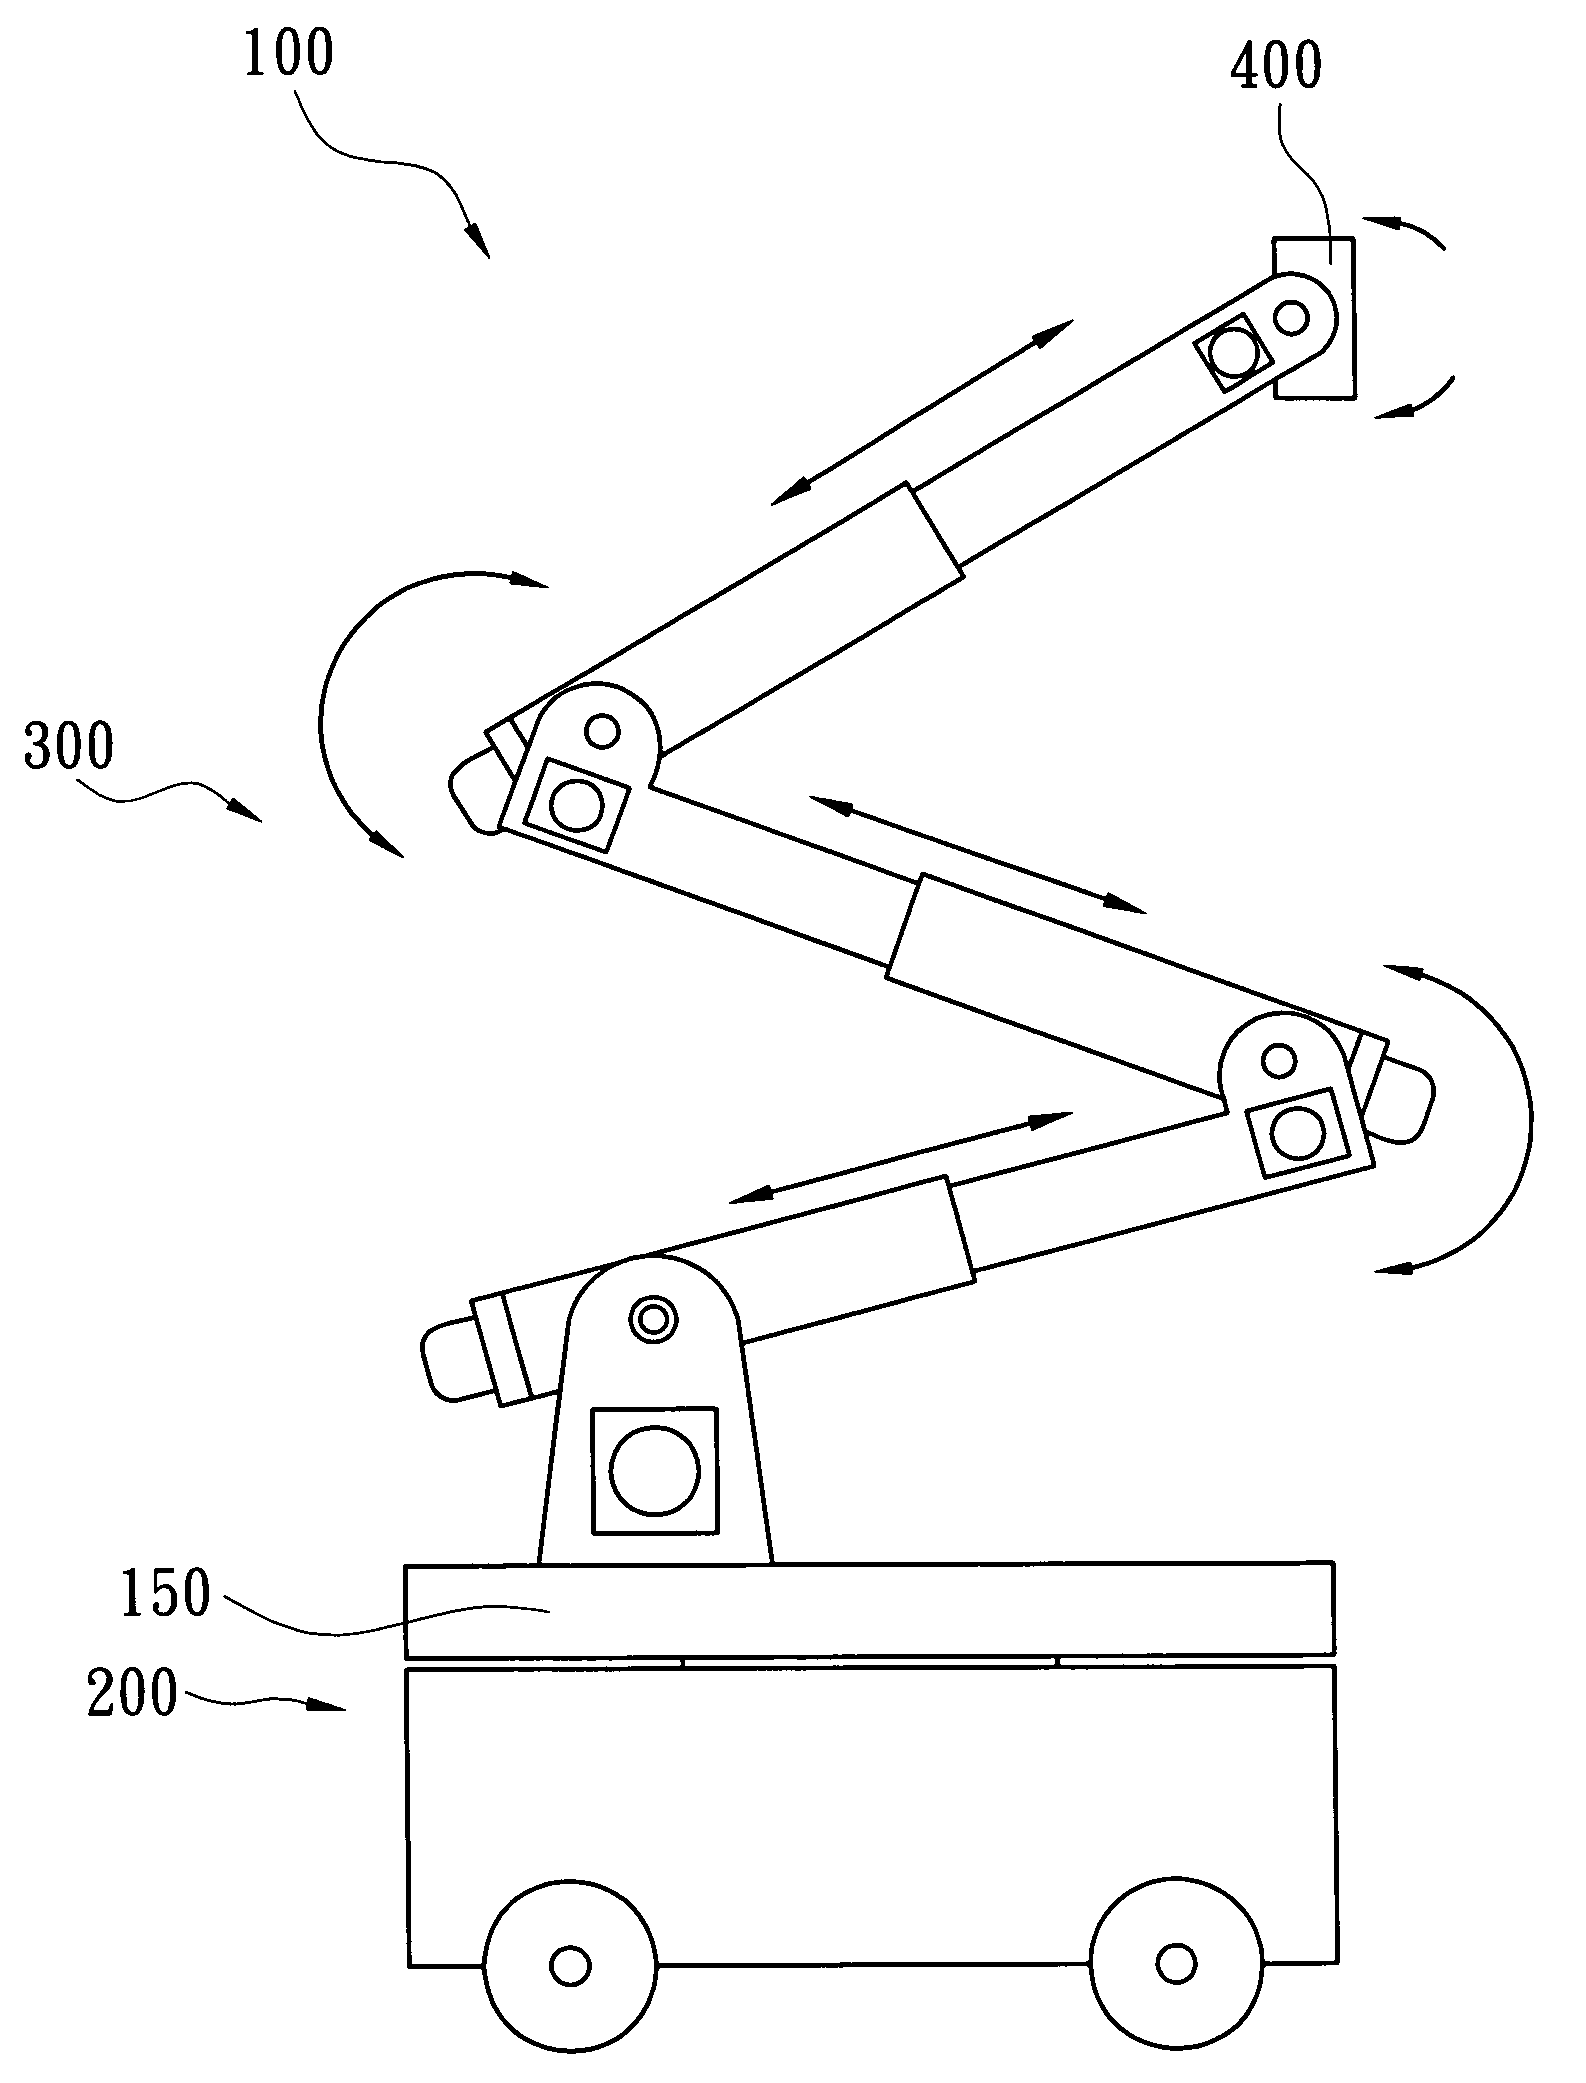 Device for retrieving data from a radio frequency identification tag